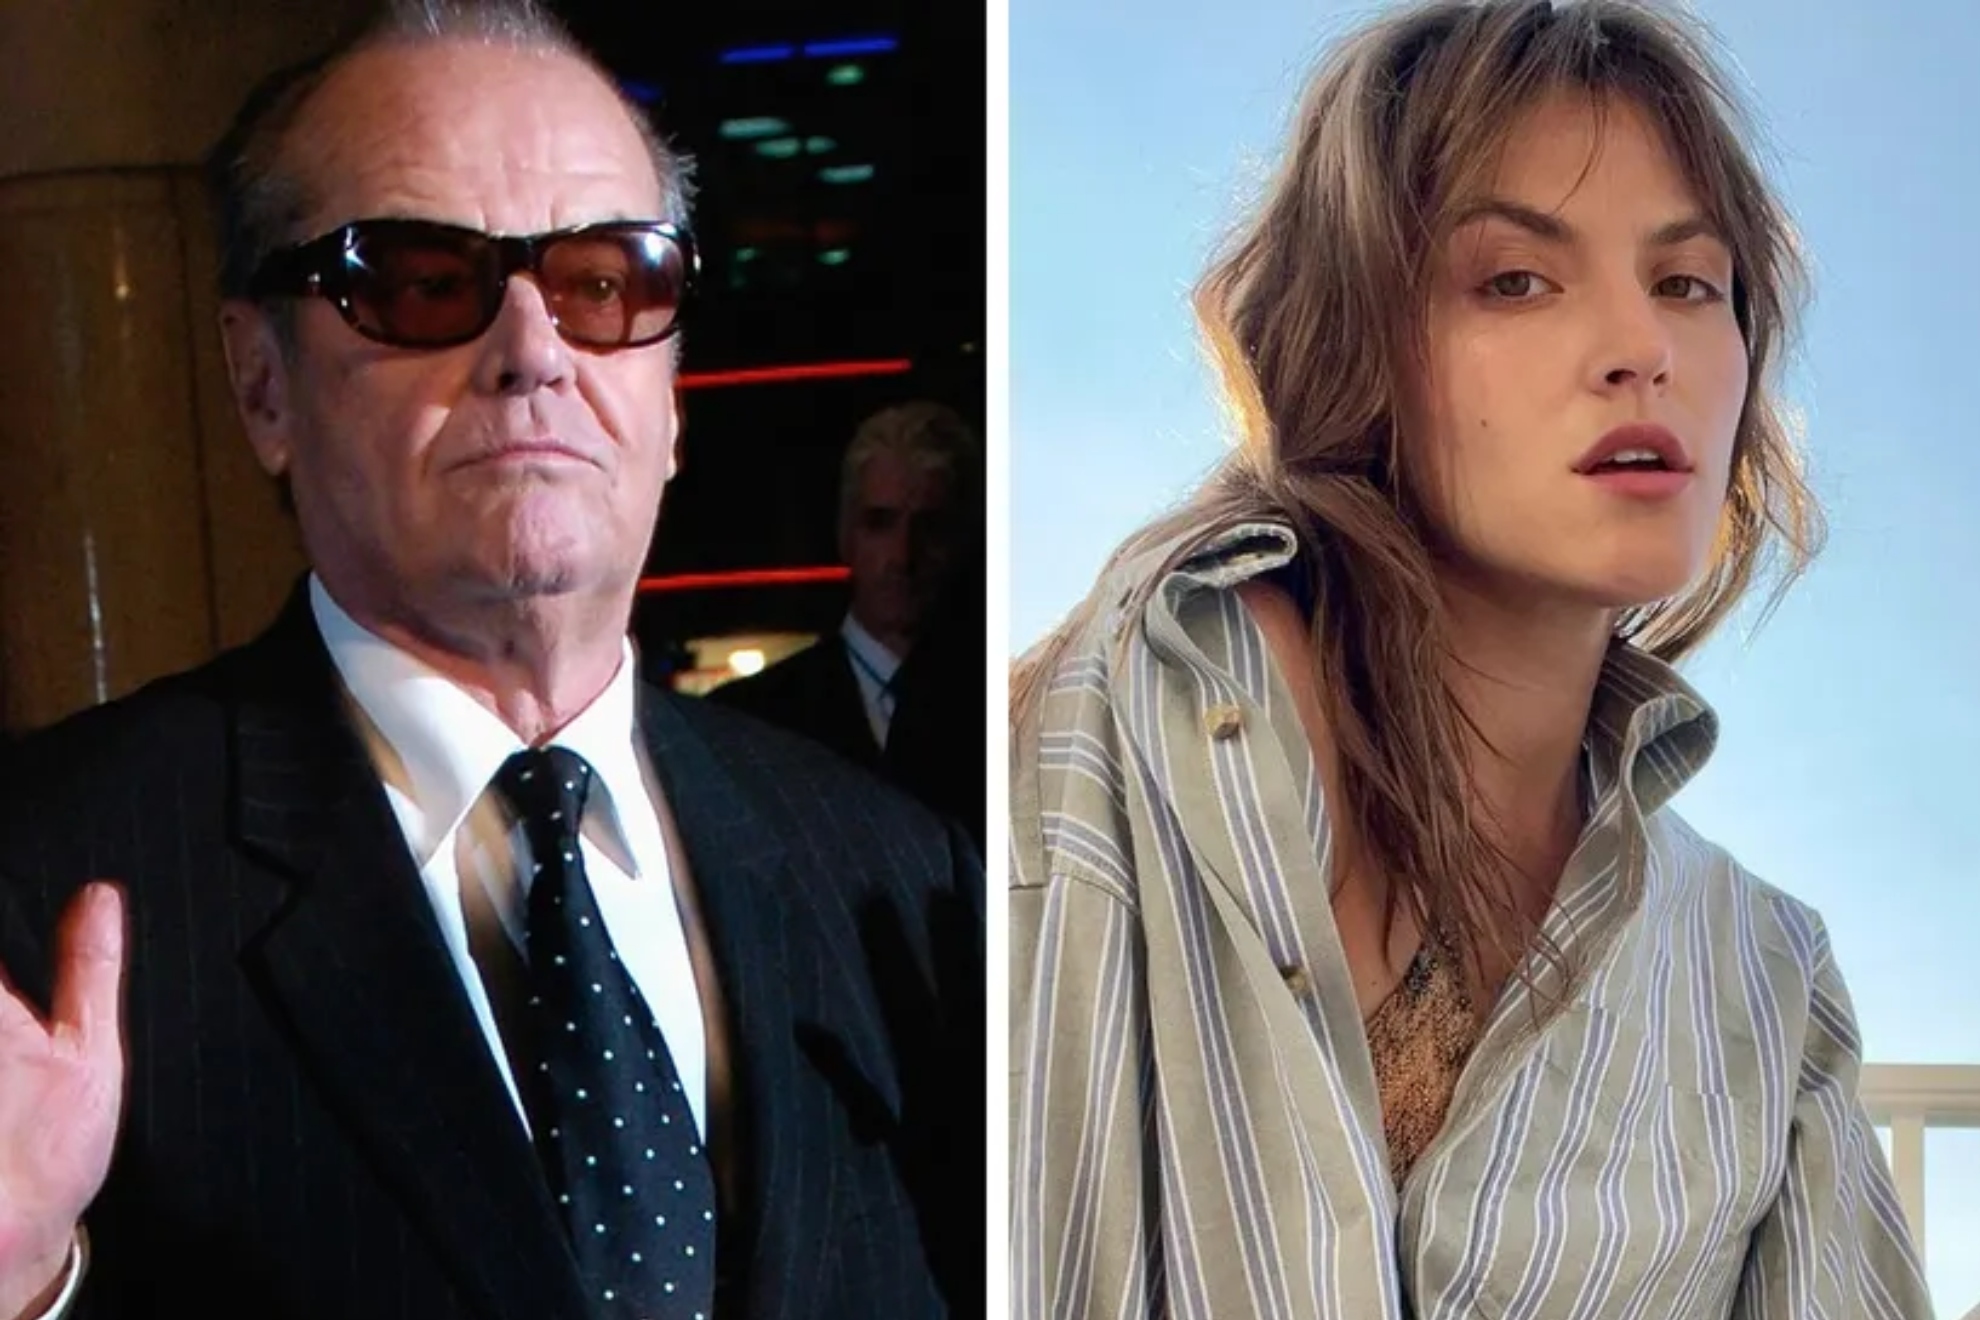 Jack Nicholson and his daughter.